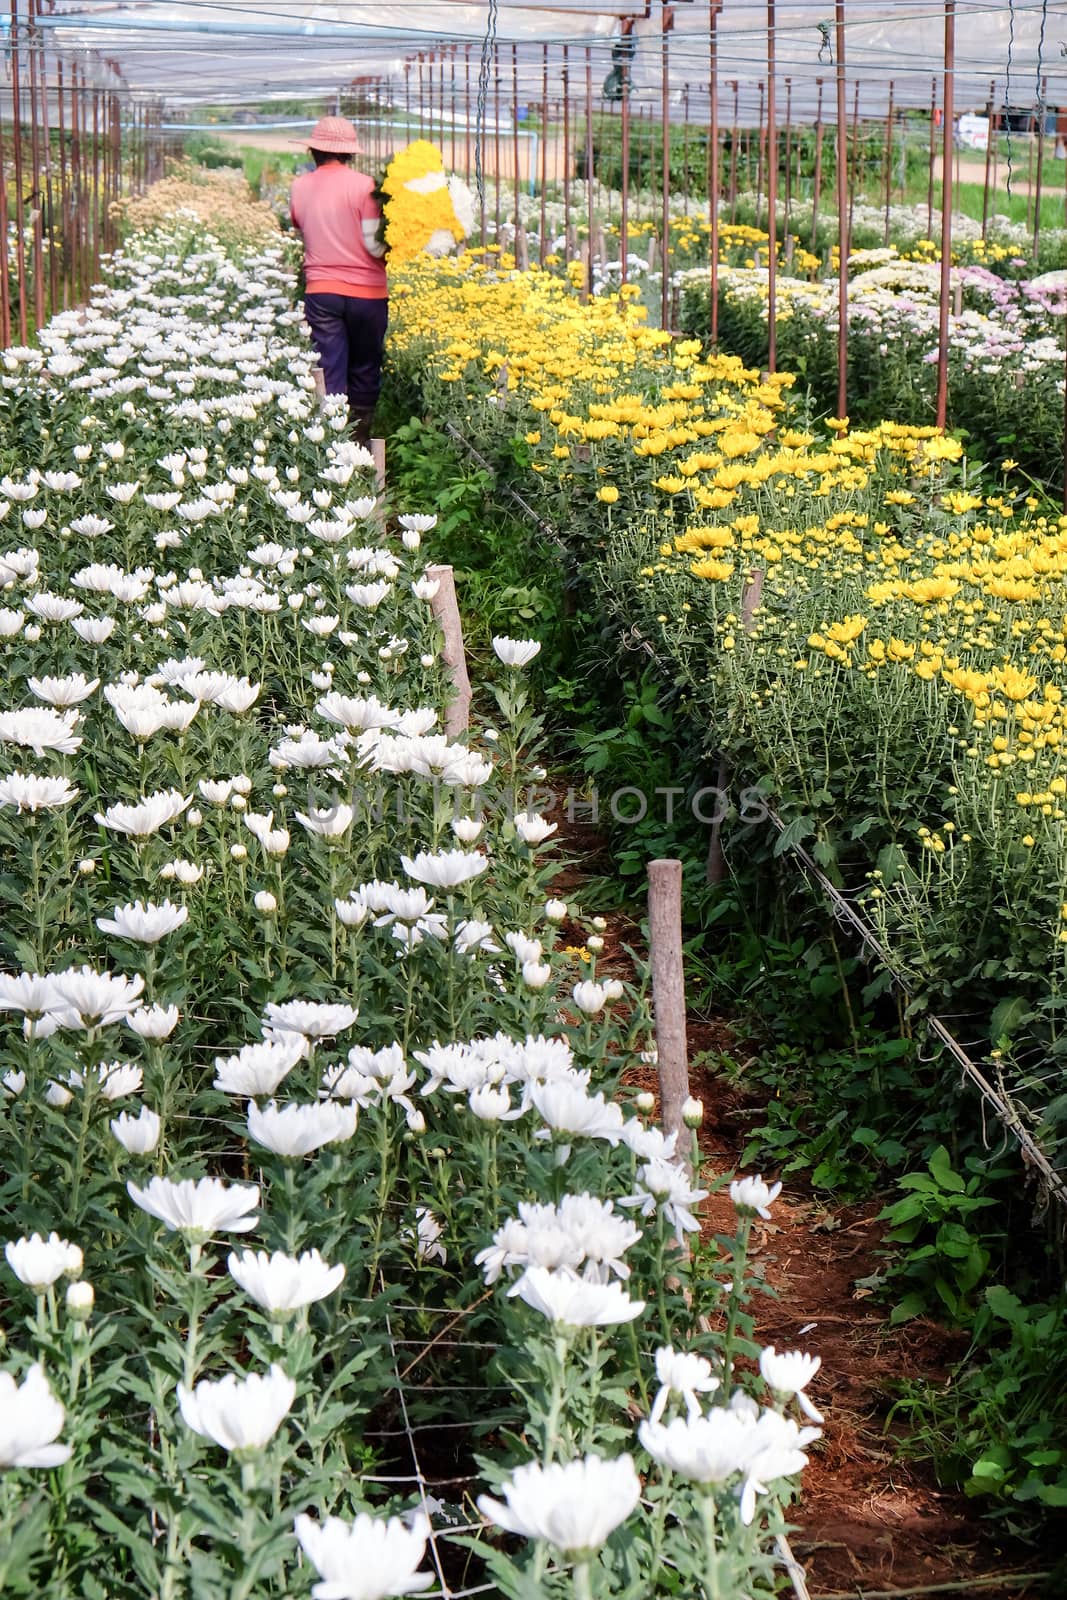 View of Gerbera cultivated flowers by ponsulak